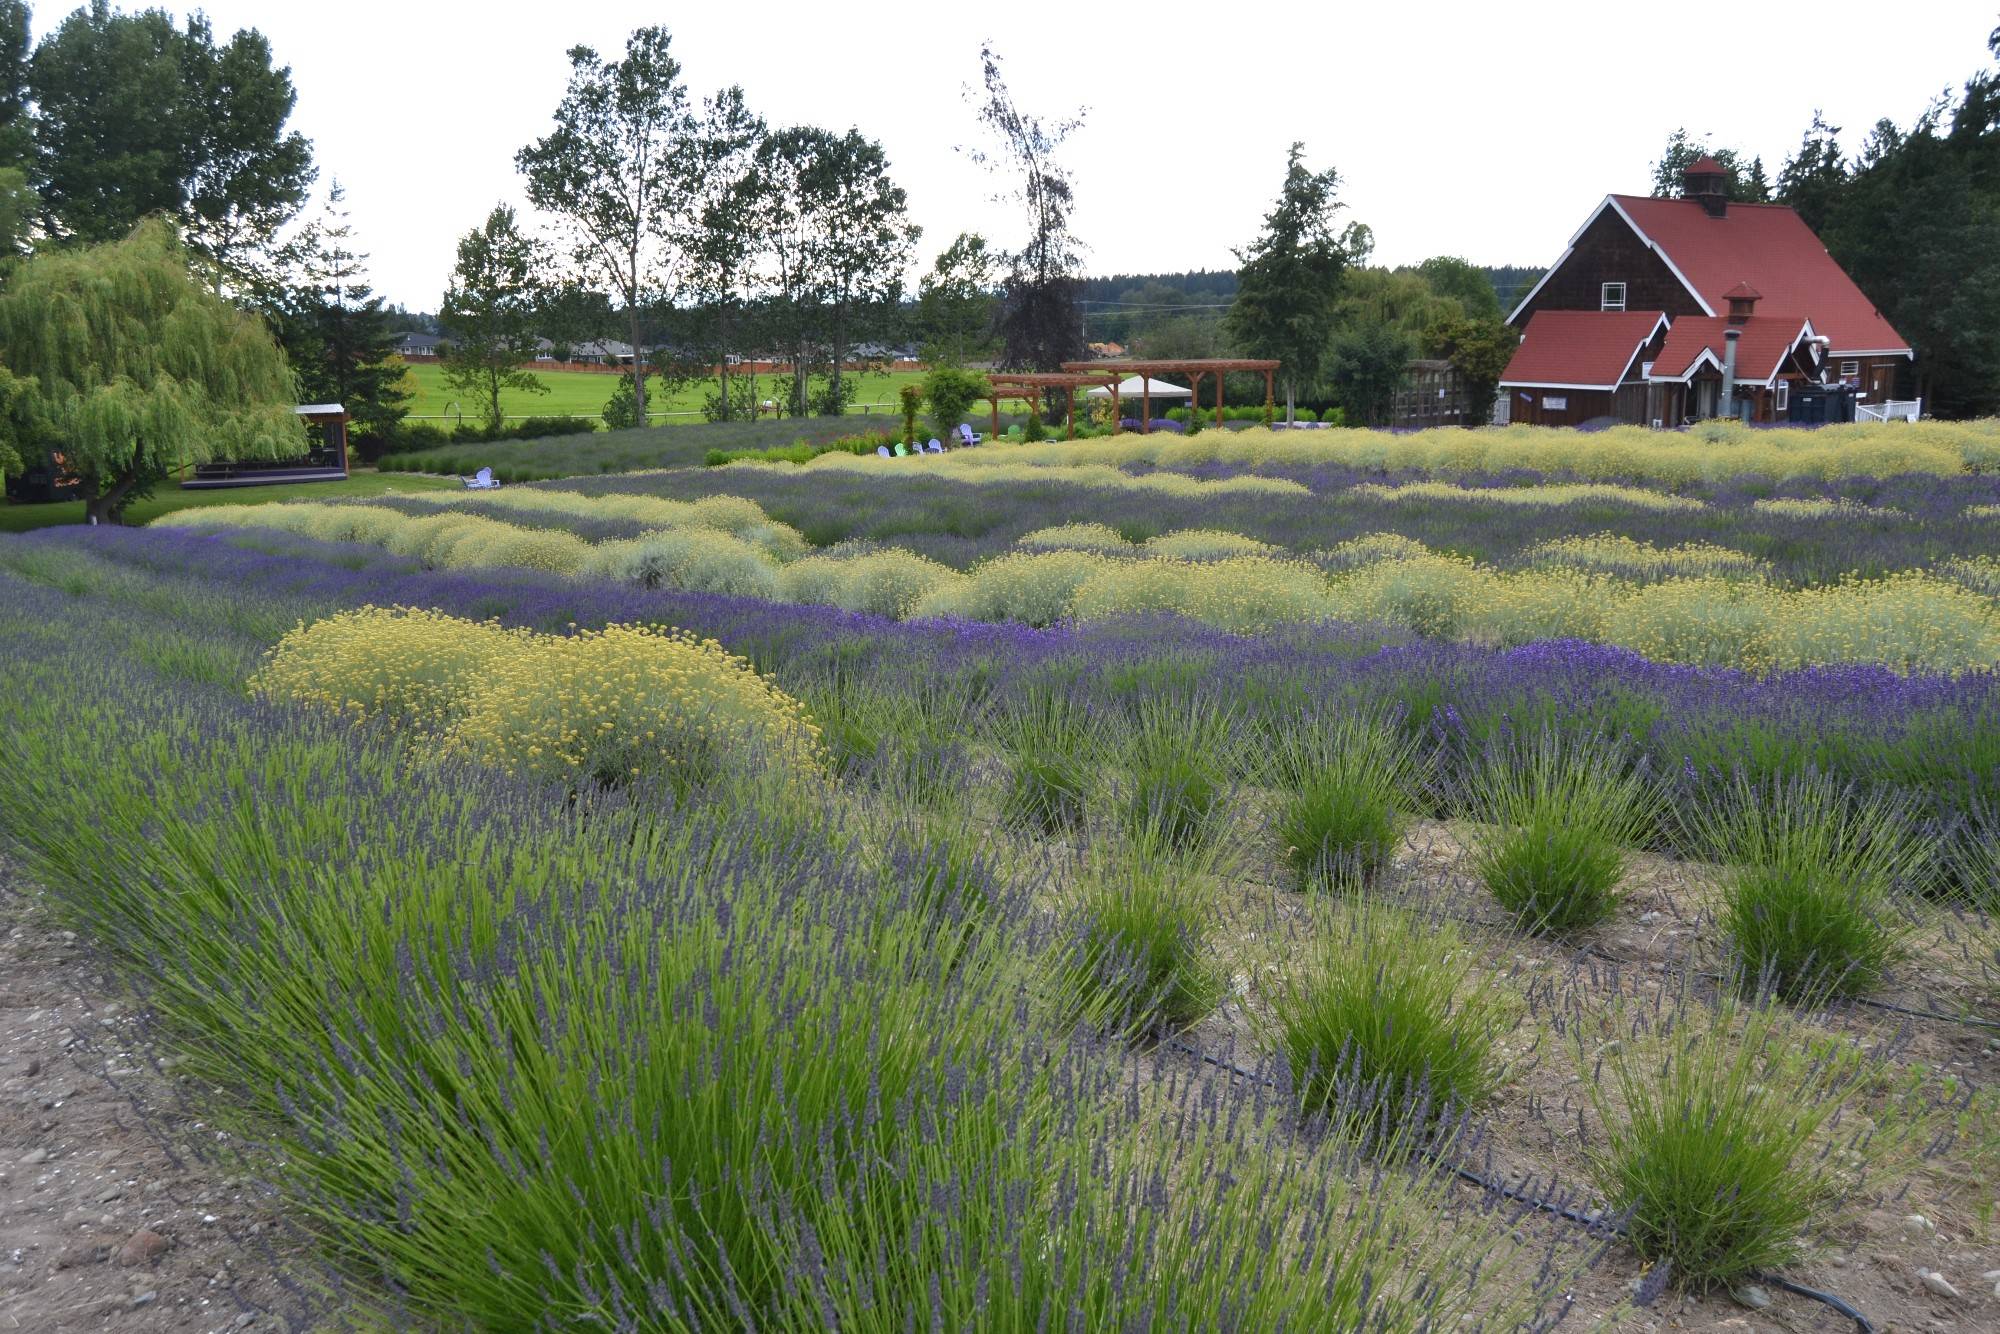 General Manager Vickie Oen said visitors began coming more frequently about two weeks ago to Purple Haze Lavender Farm. She said “lavender farms are great for social distancing.” Sequim Gazette photo by Matthew Nash